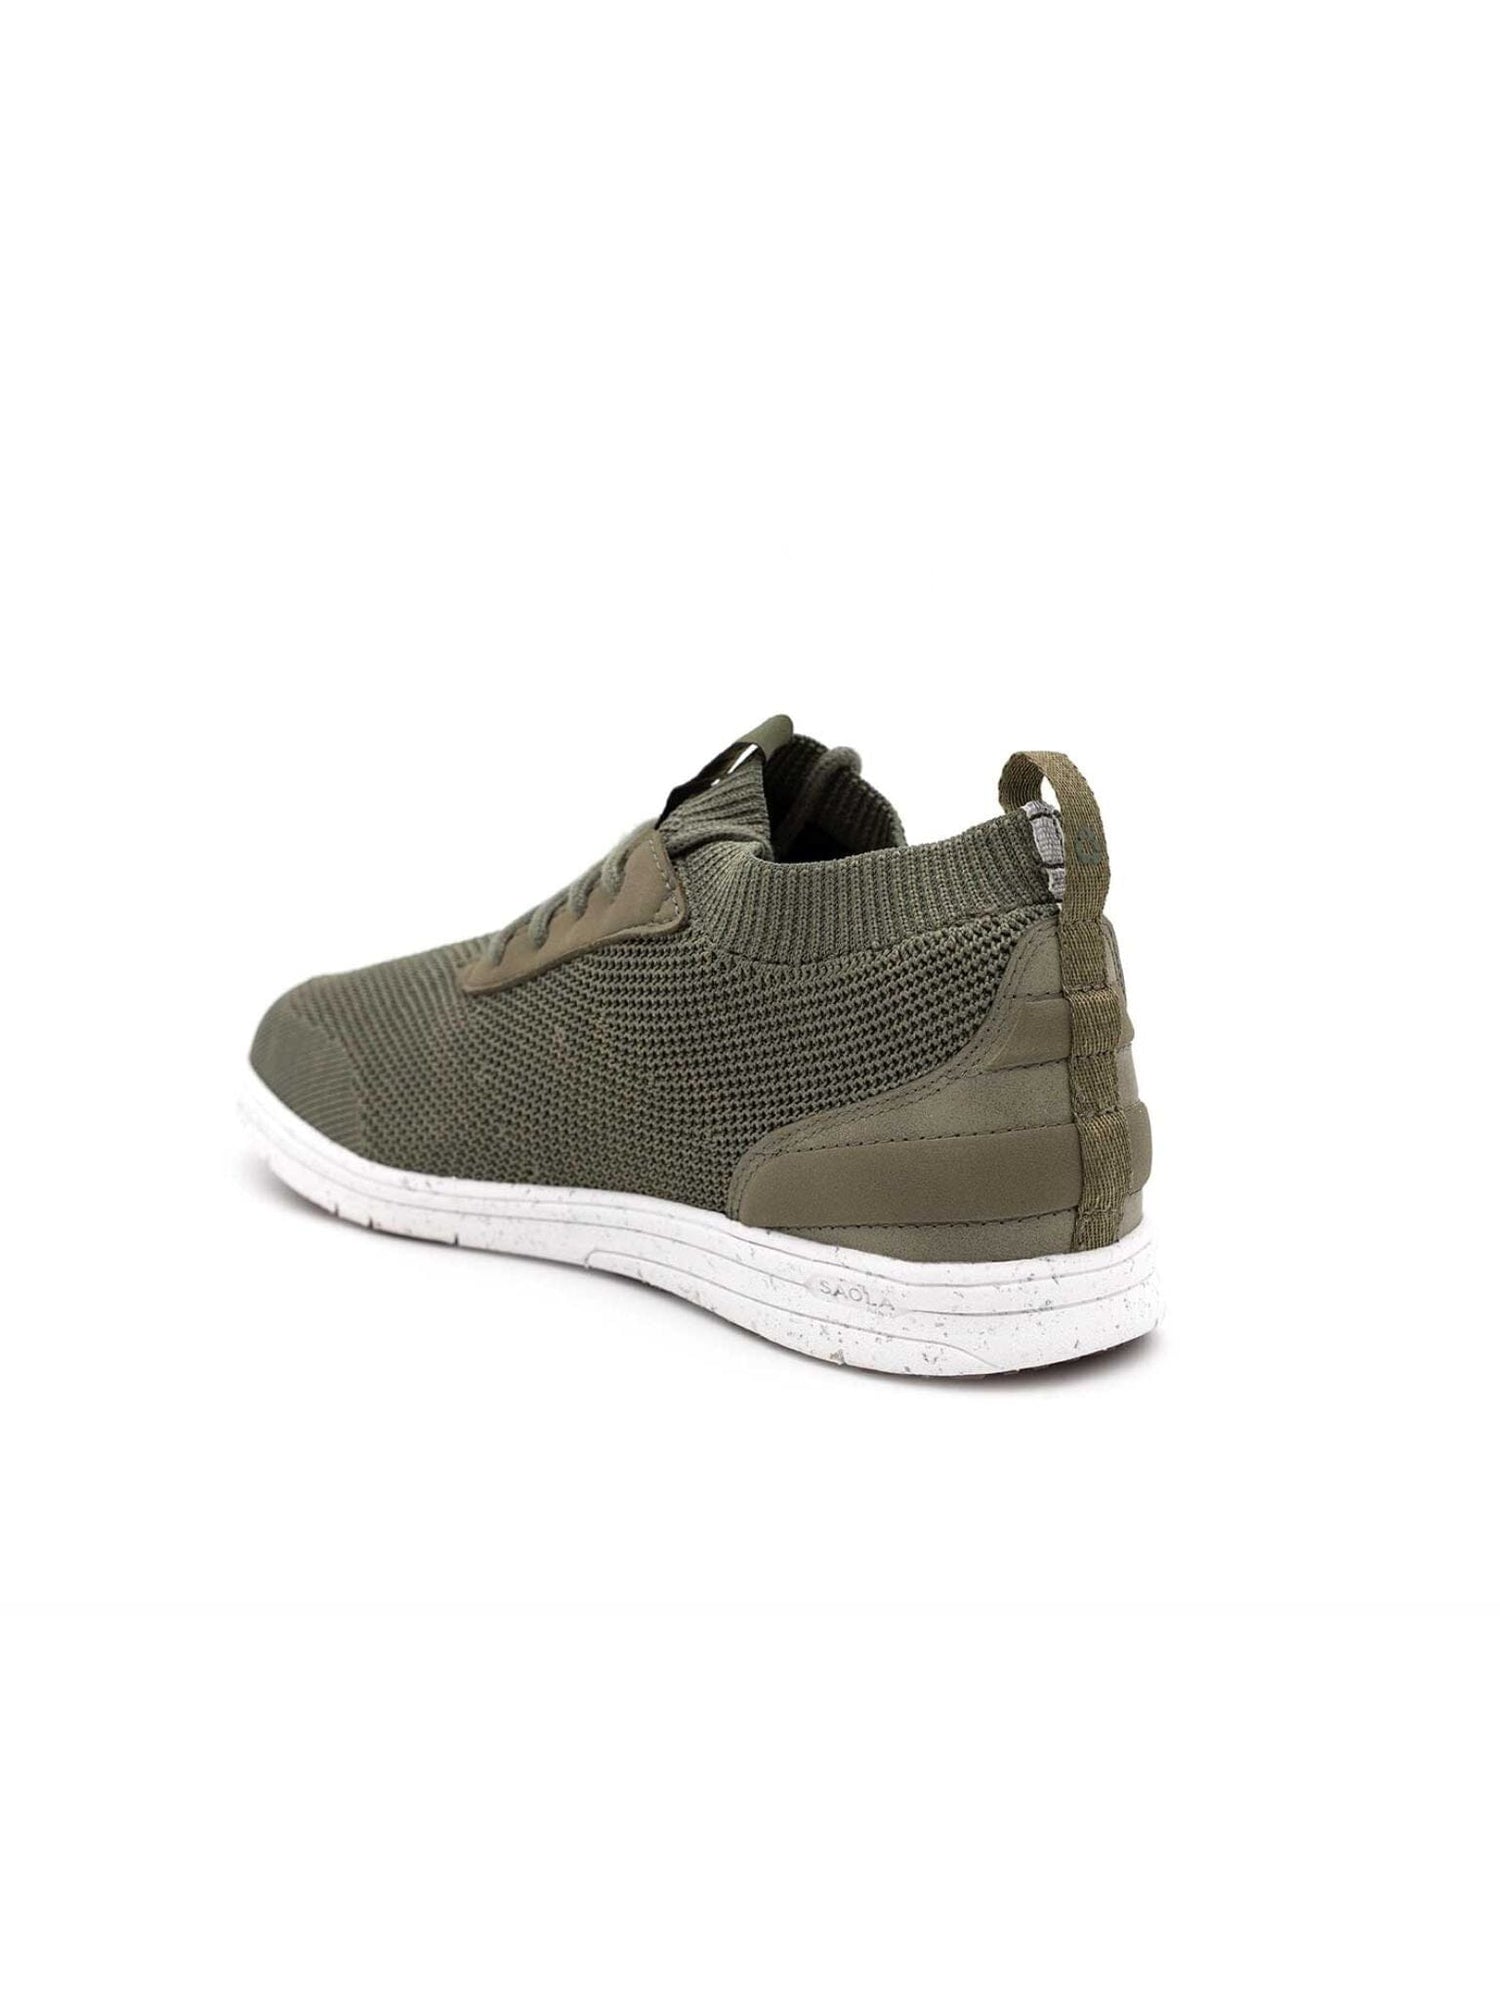 Saola W's Mindo Waterproof - Recycled PET Olive Green Shoes